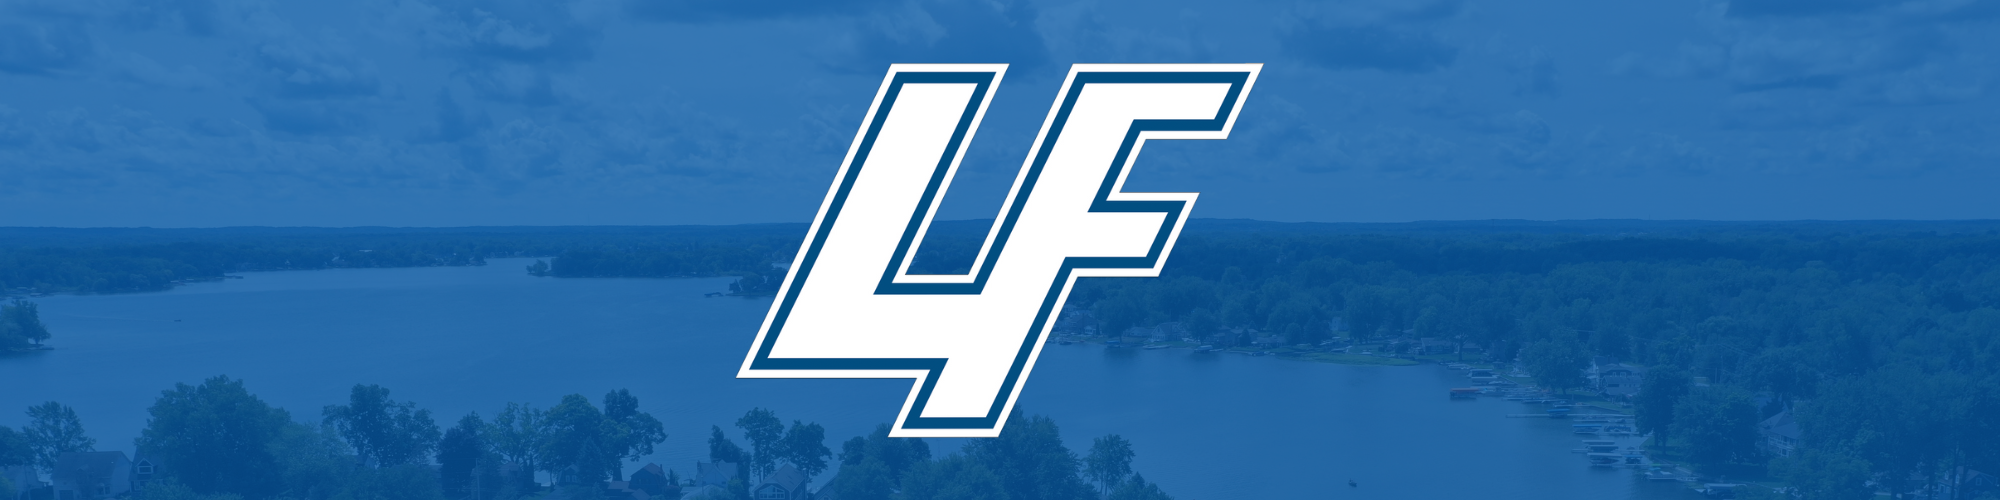 drone photo of Lake Fenton water with school's L.F. logo over it